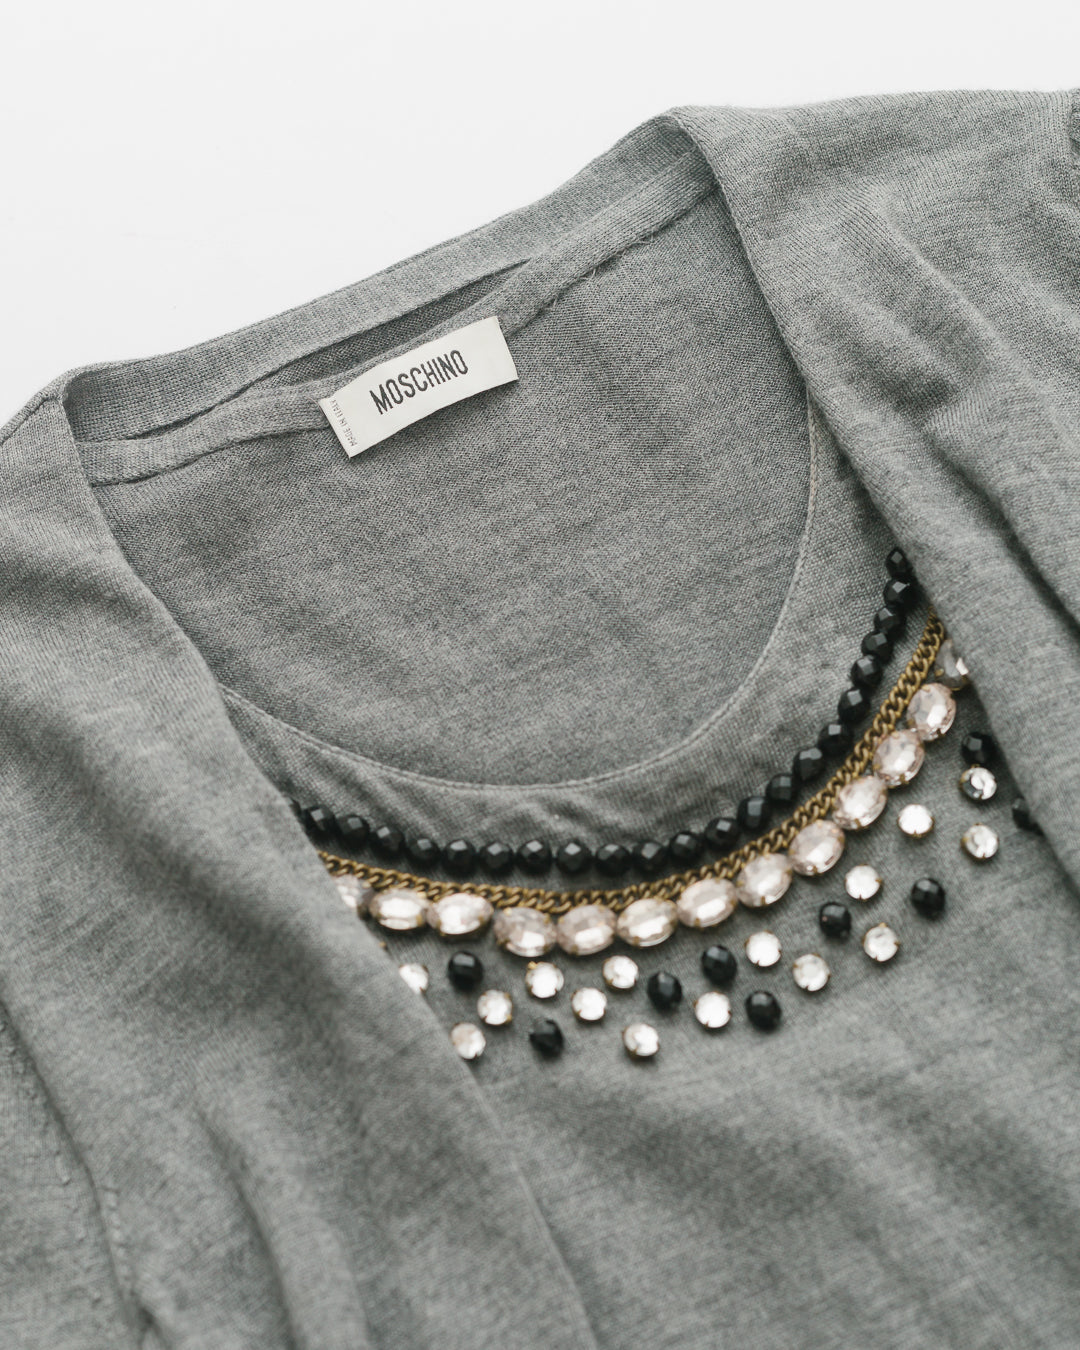 Moschino Embellished Knit Top